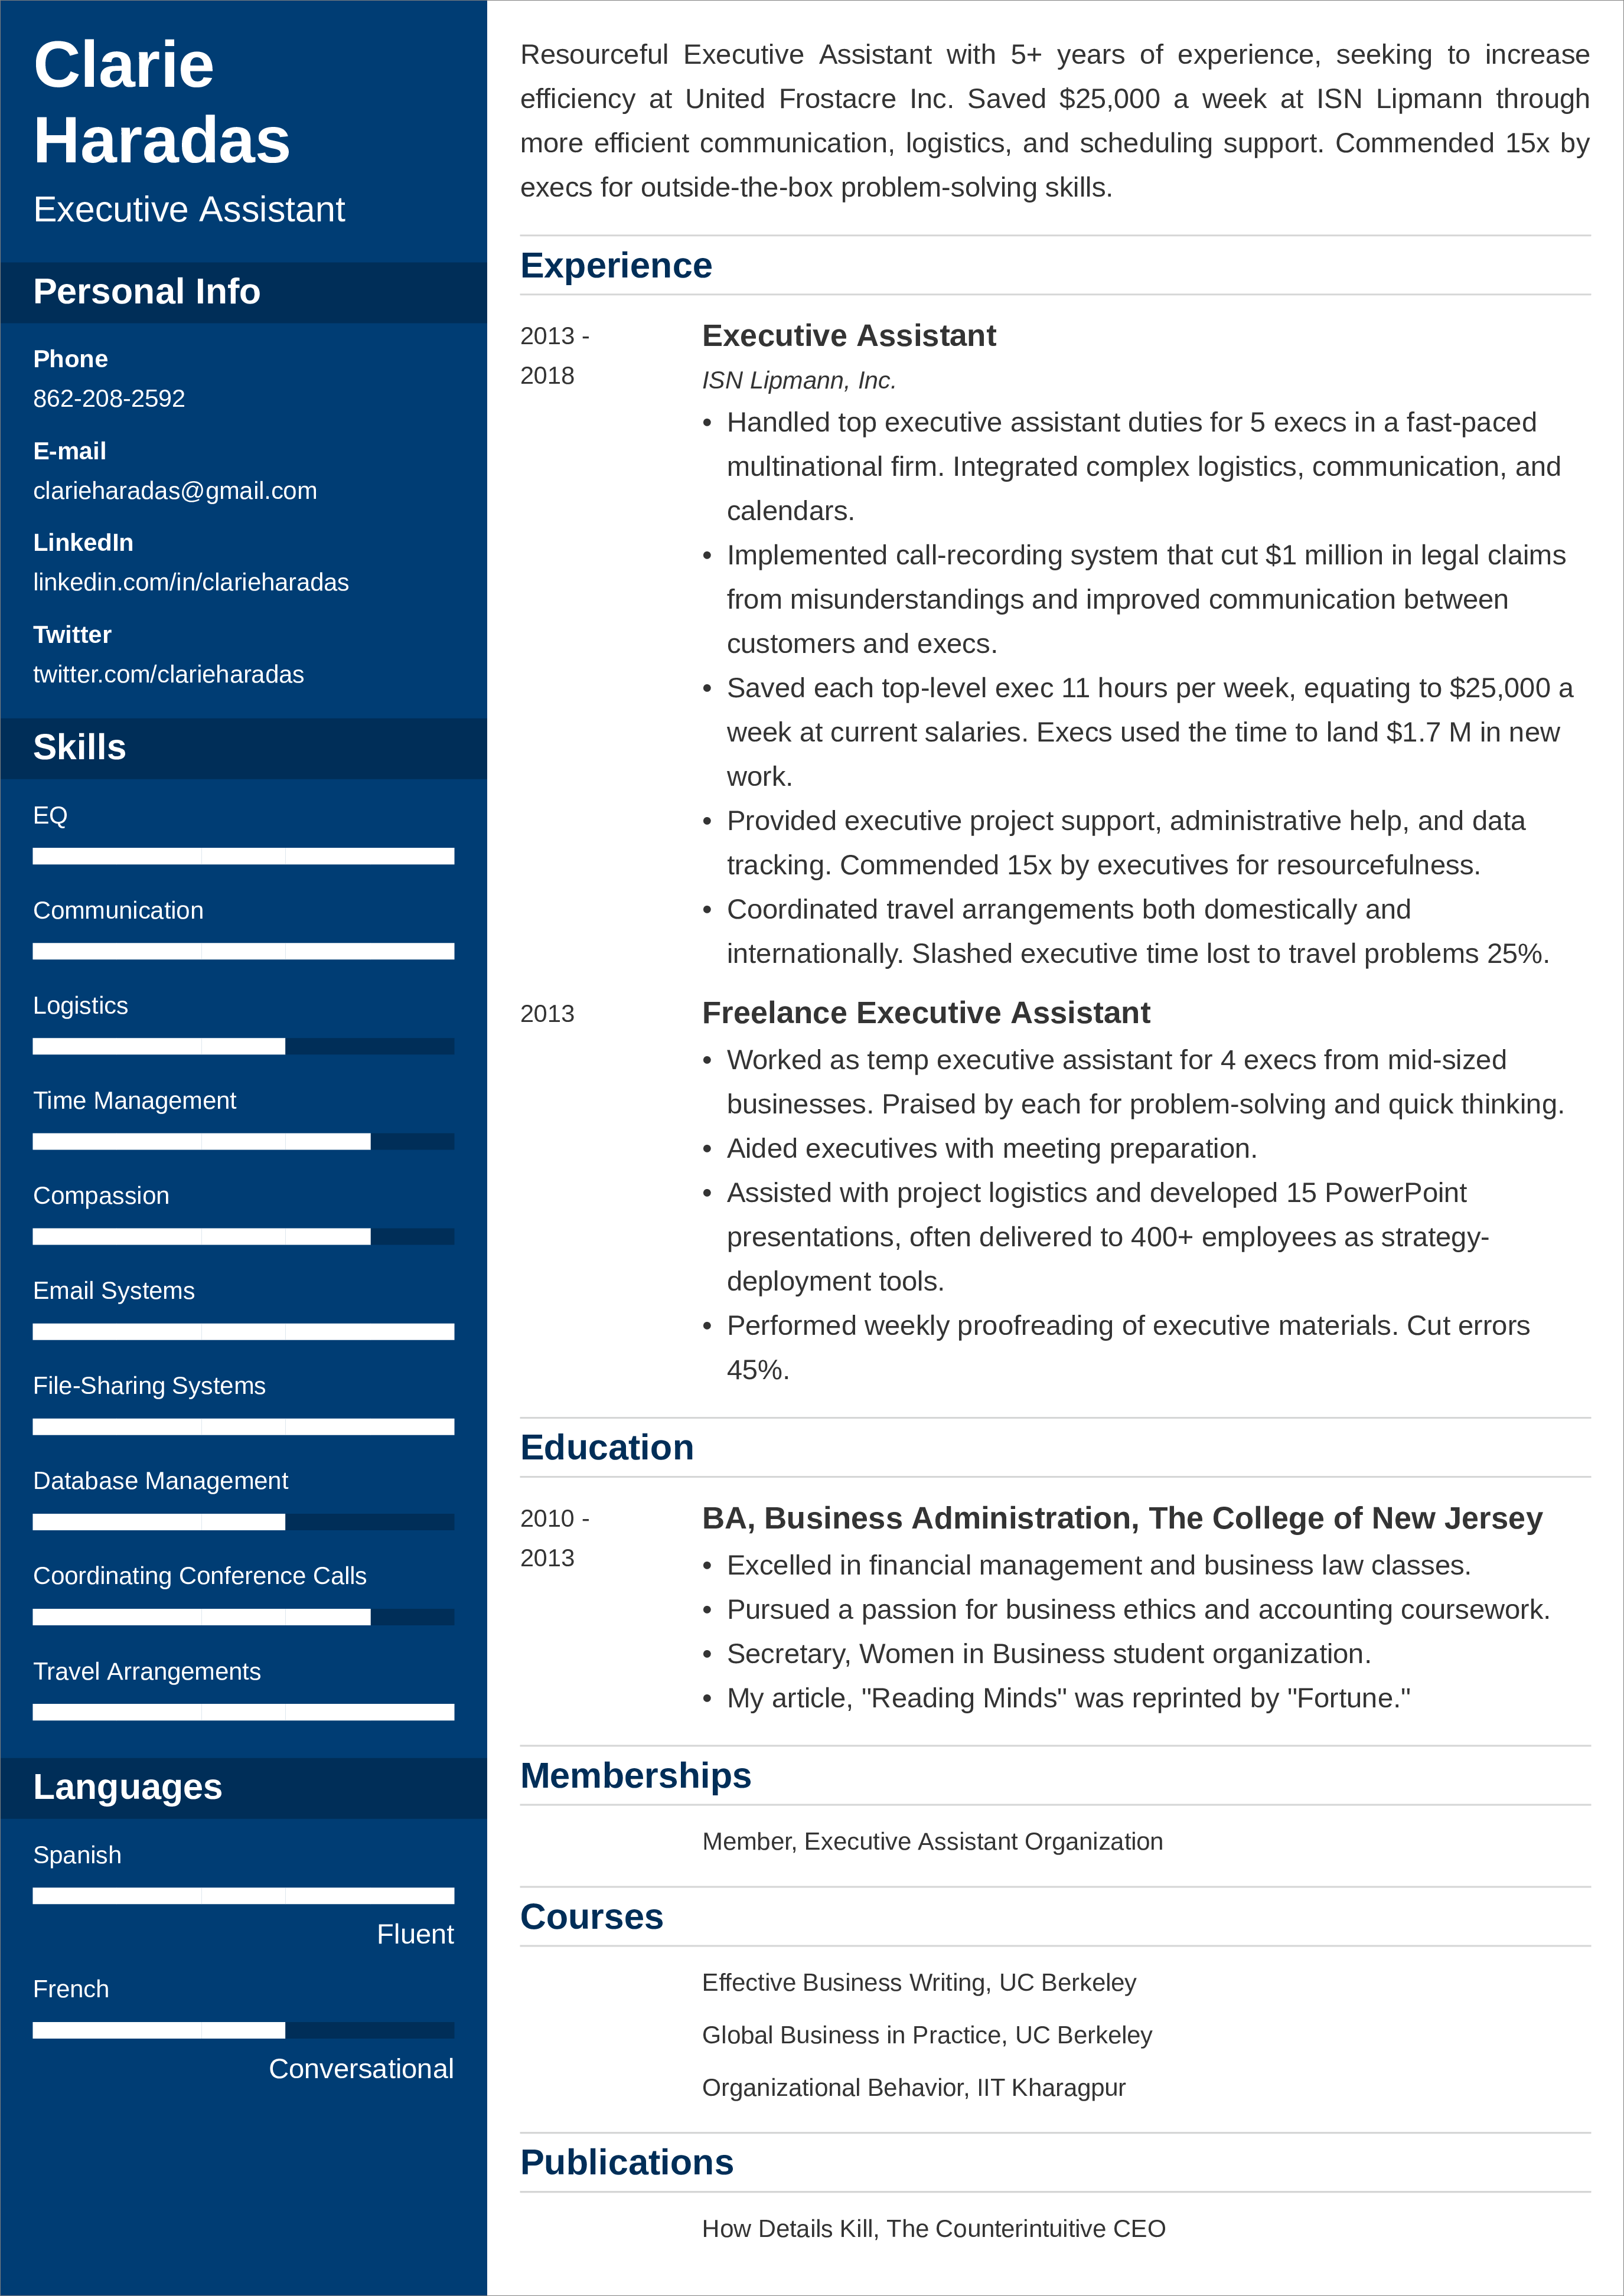 work experience on a resume